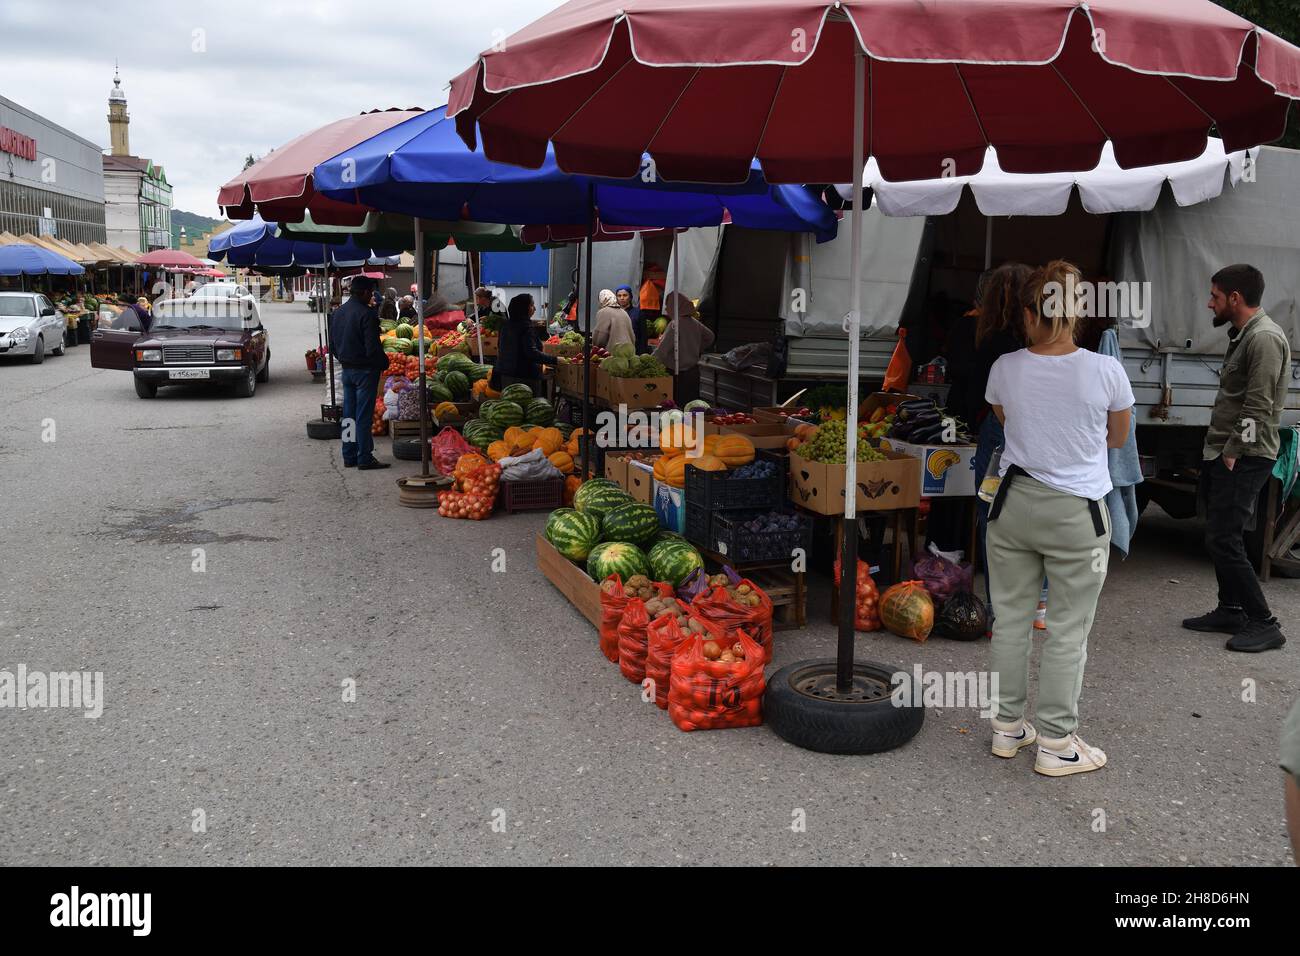 Vedeno, Russia - September 10, 2021: Street food market in settlement Vedeno,  45 km south of the regional capital Grozny, Chechnya Stock Photo